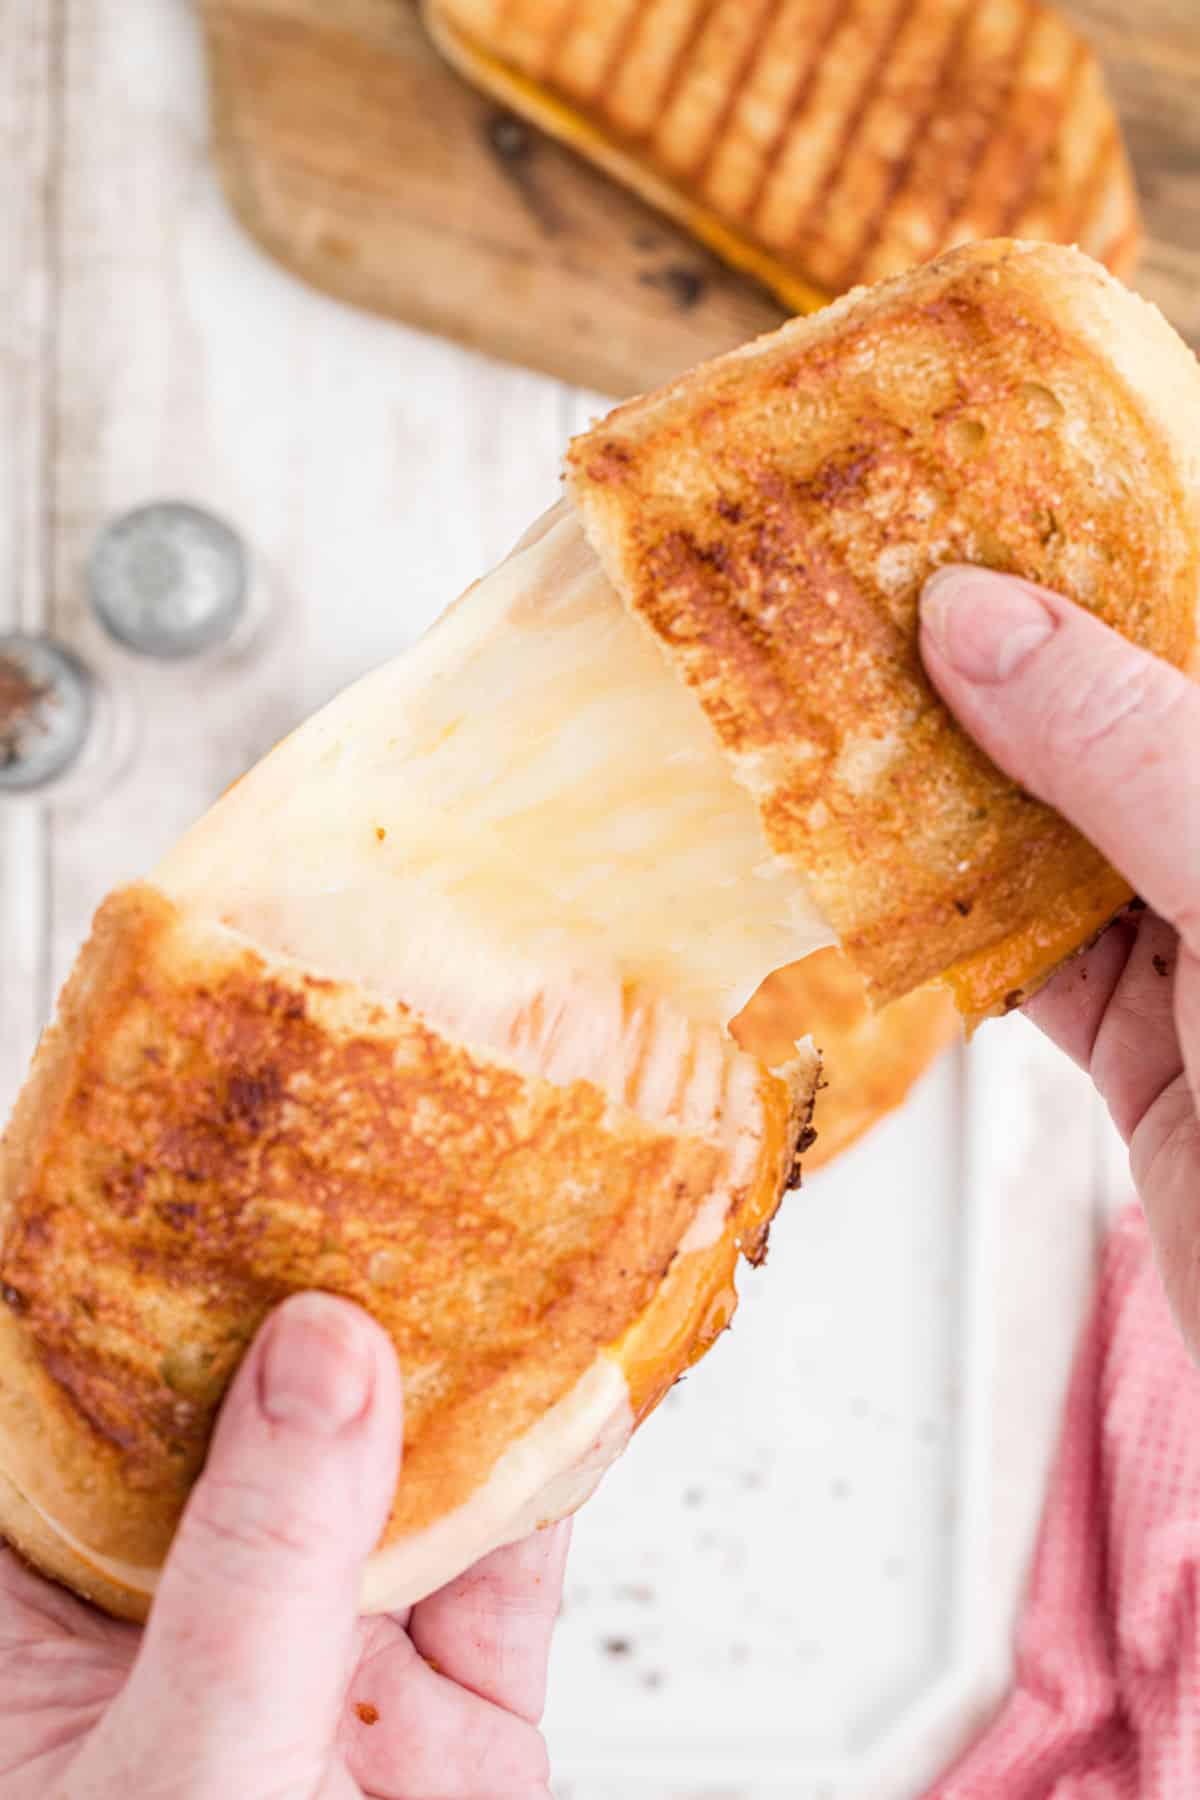 A Starbucks grilled cheese being pulled apart and all cheesy.